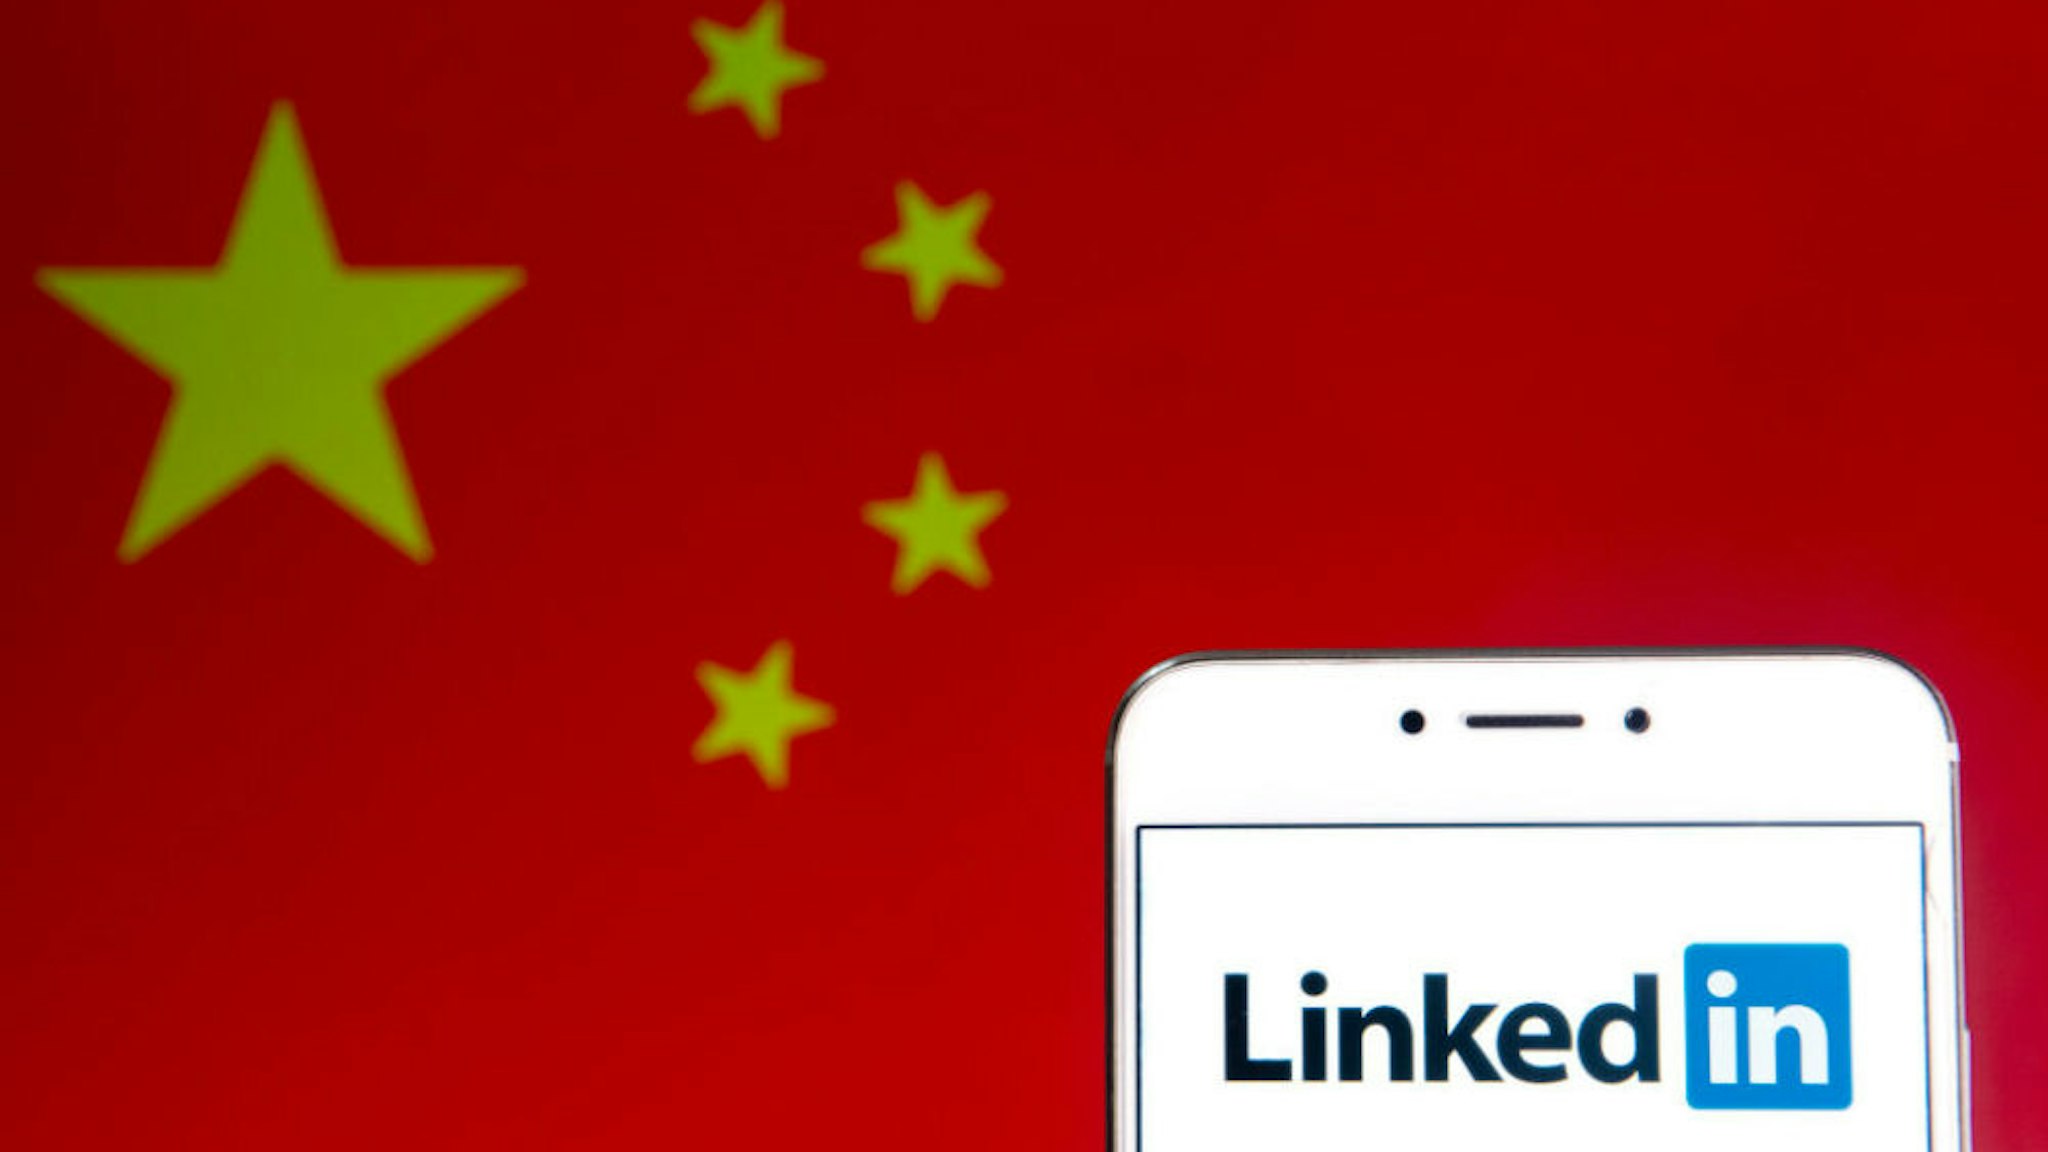 HONG KONG - 2019/04/06: In this photo illustration a business and employment oriented network and platform LinkedIn logo is seen on an Android mobile device with People's Republic of China flag in the background.